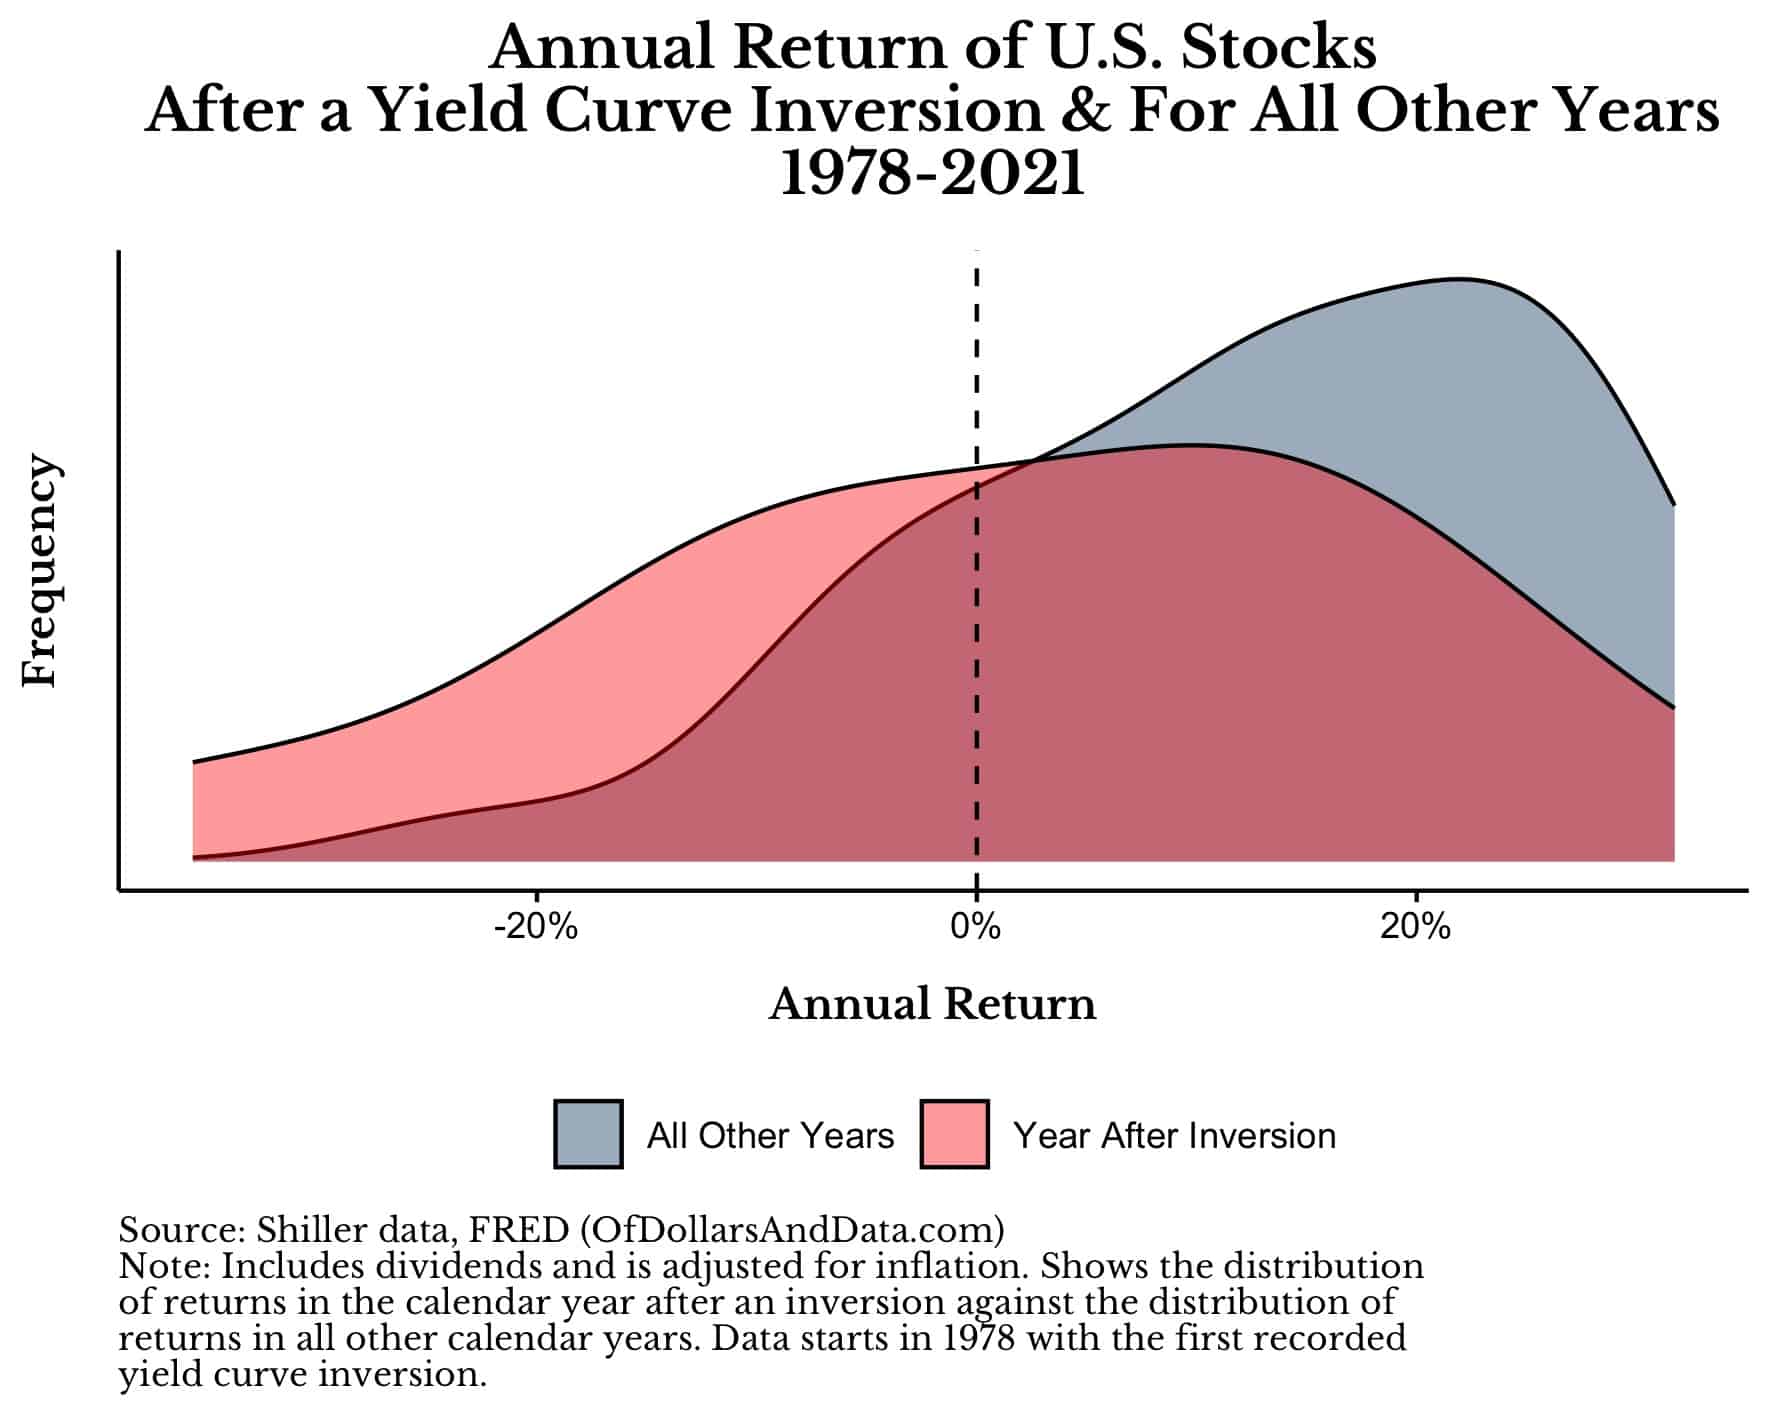 Annual return distribution of US stocks after a yield curve inversion and for all other years, 1978-2021